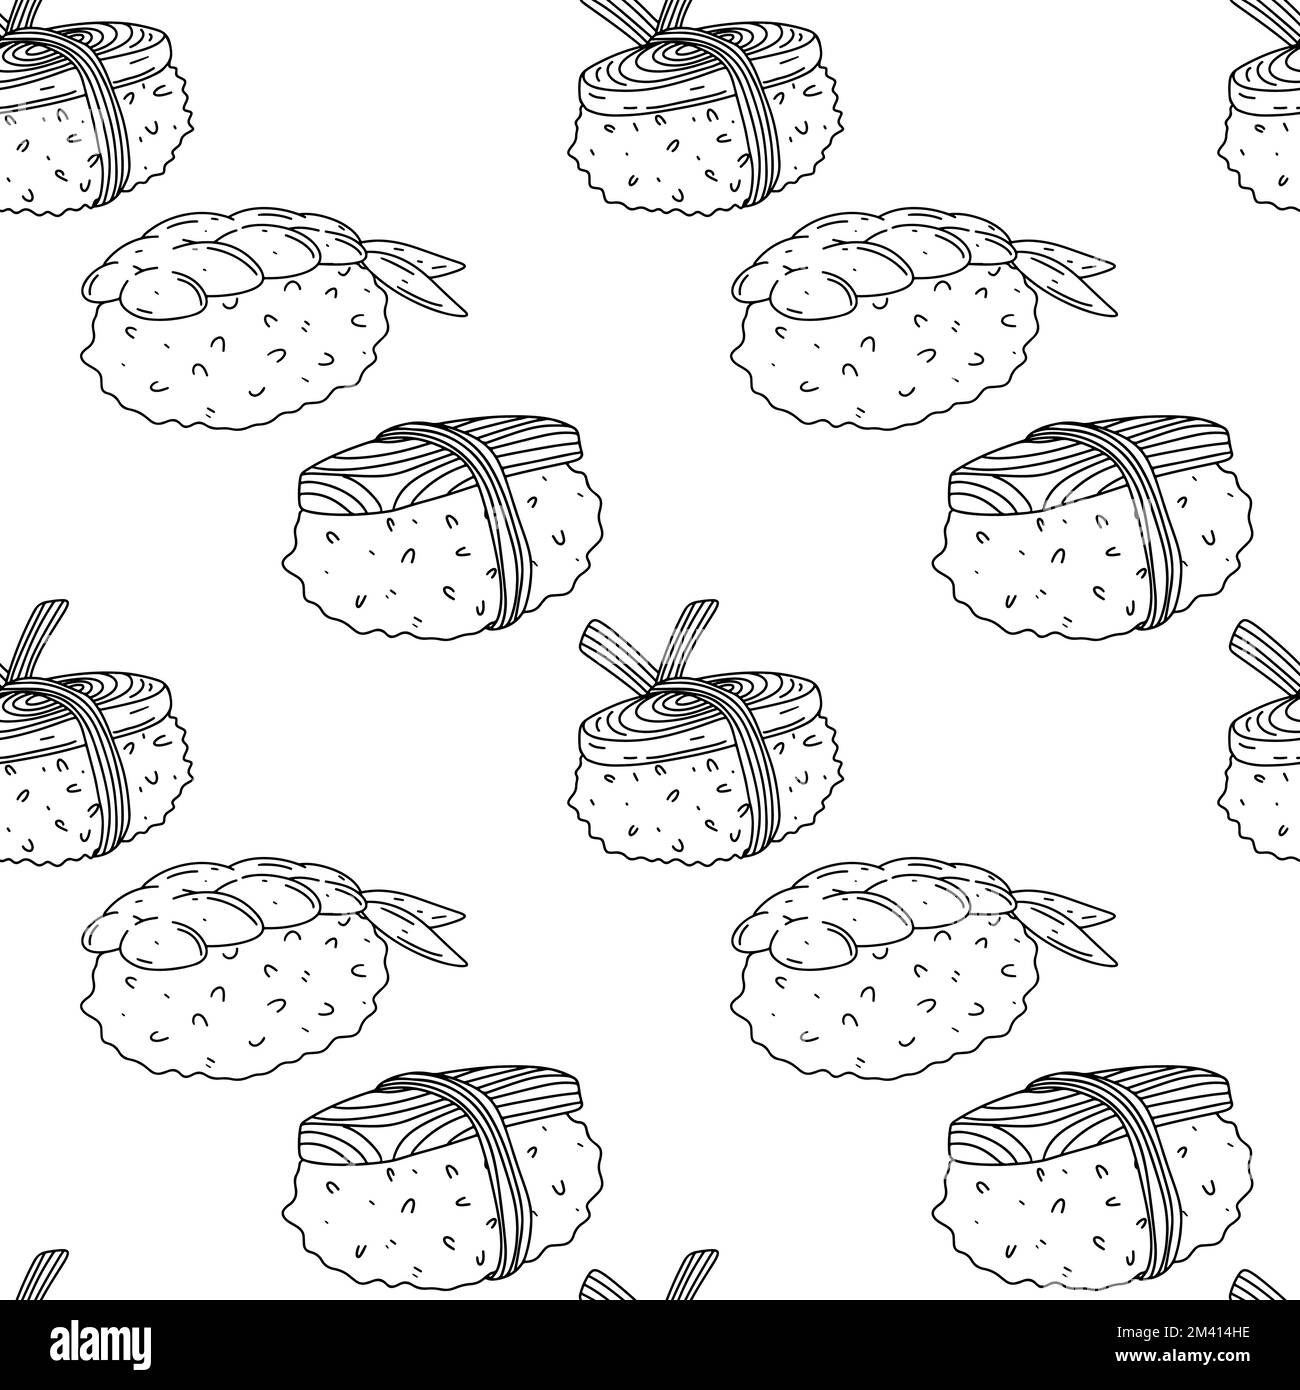 Sushi set seamless pattern. Vector illustration isolated on a white background. Asian food. Stock Vector